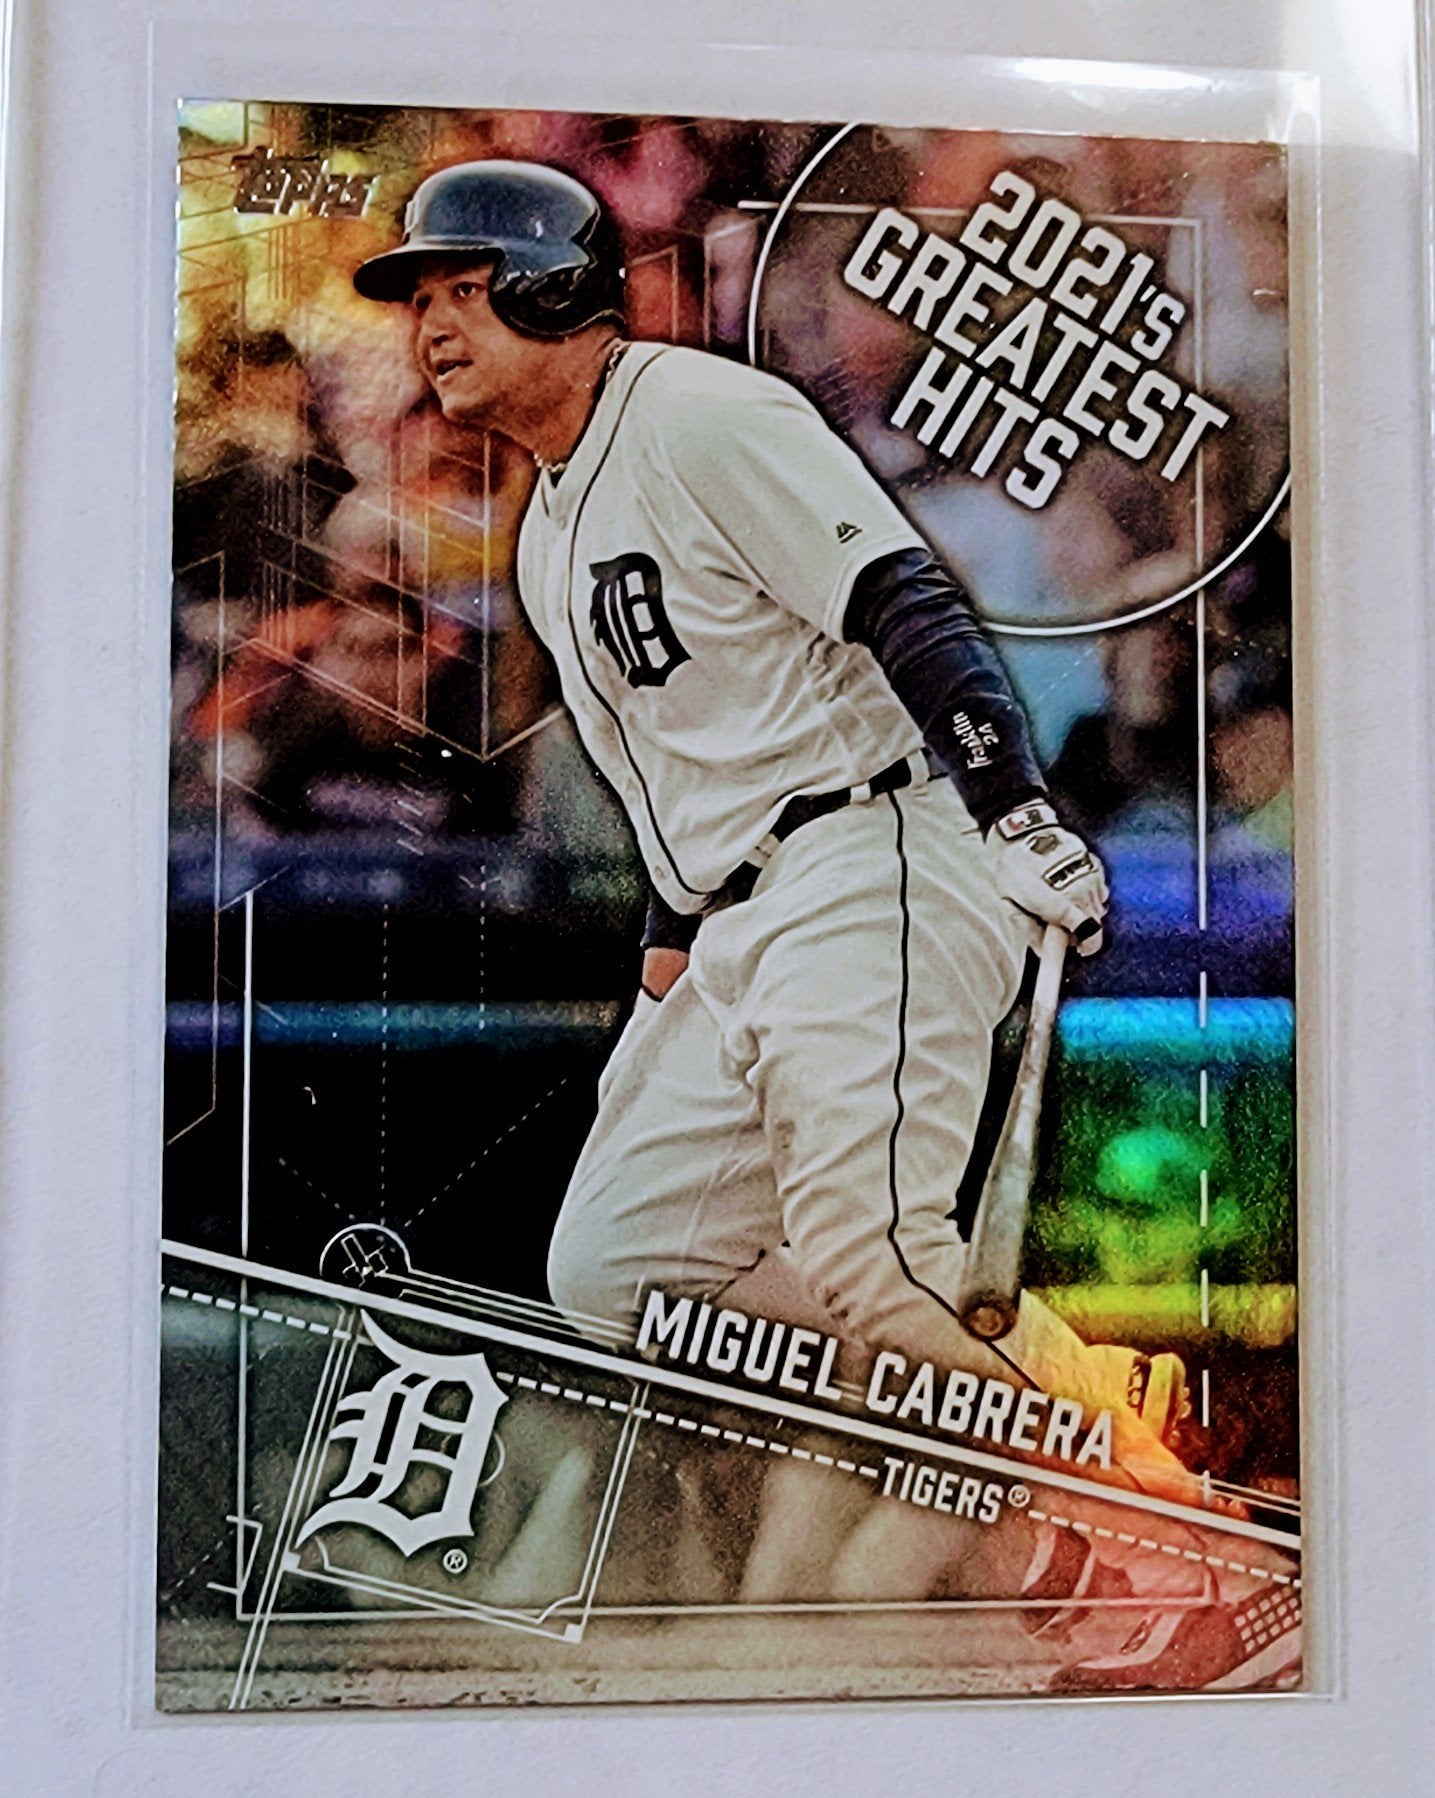 Miguel Cabrera Trading Cards: Values, Tracking & Hot Deals